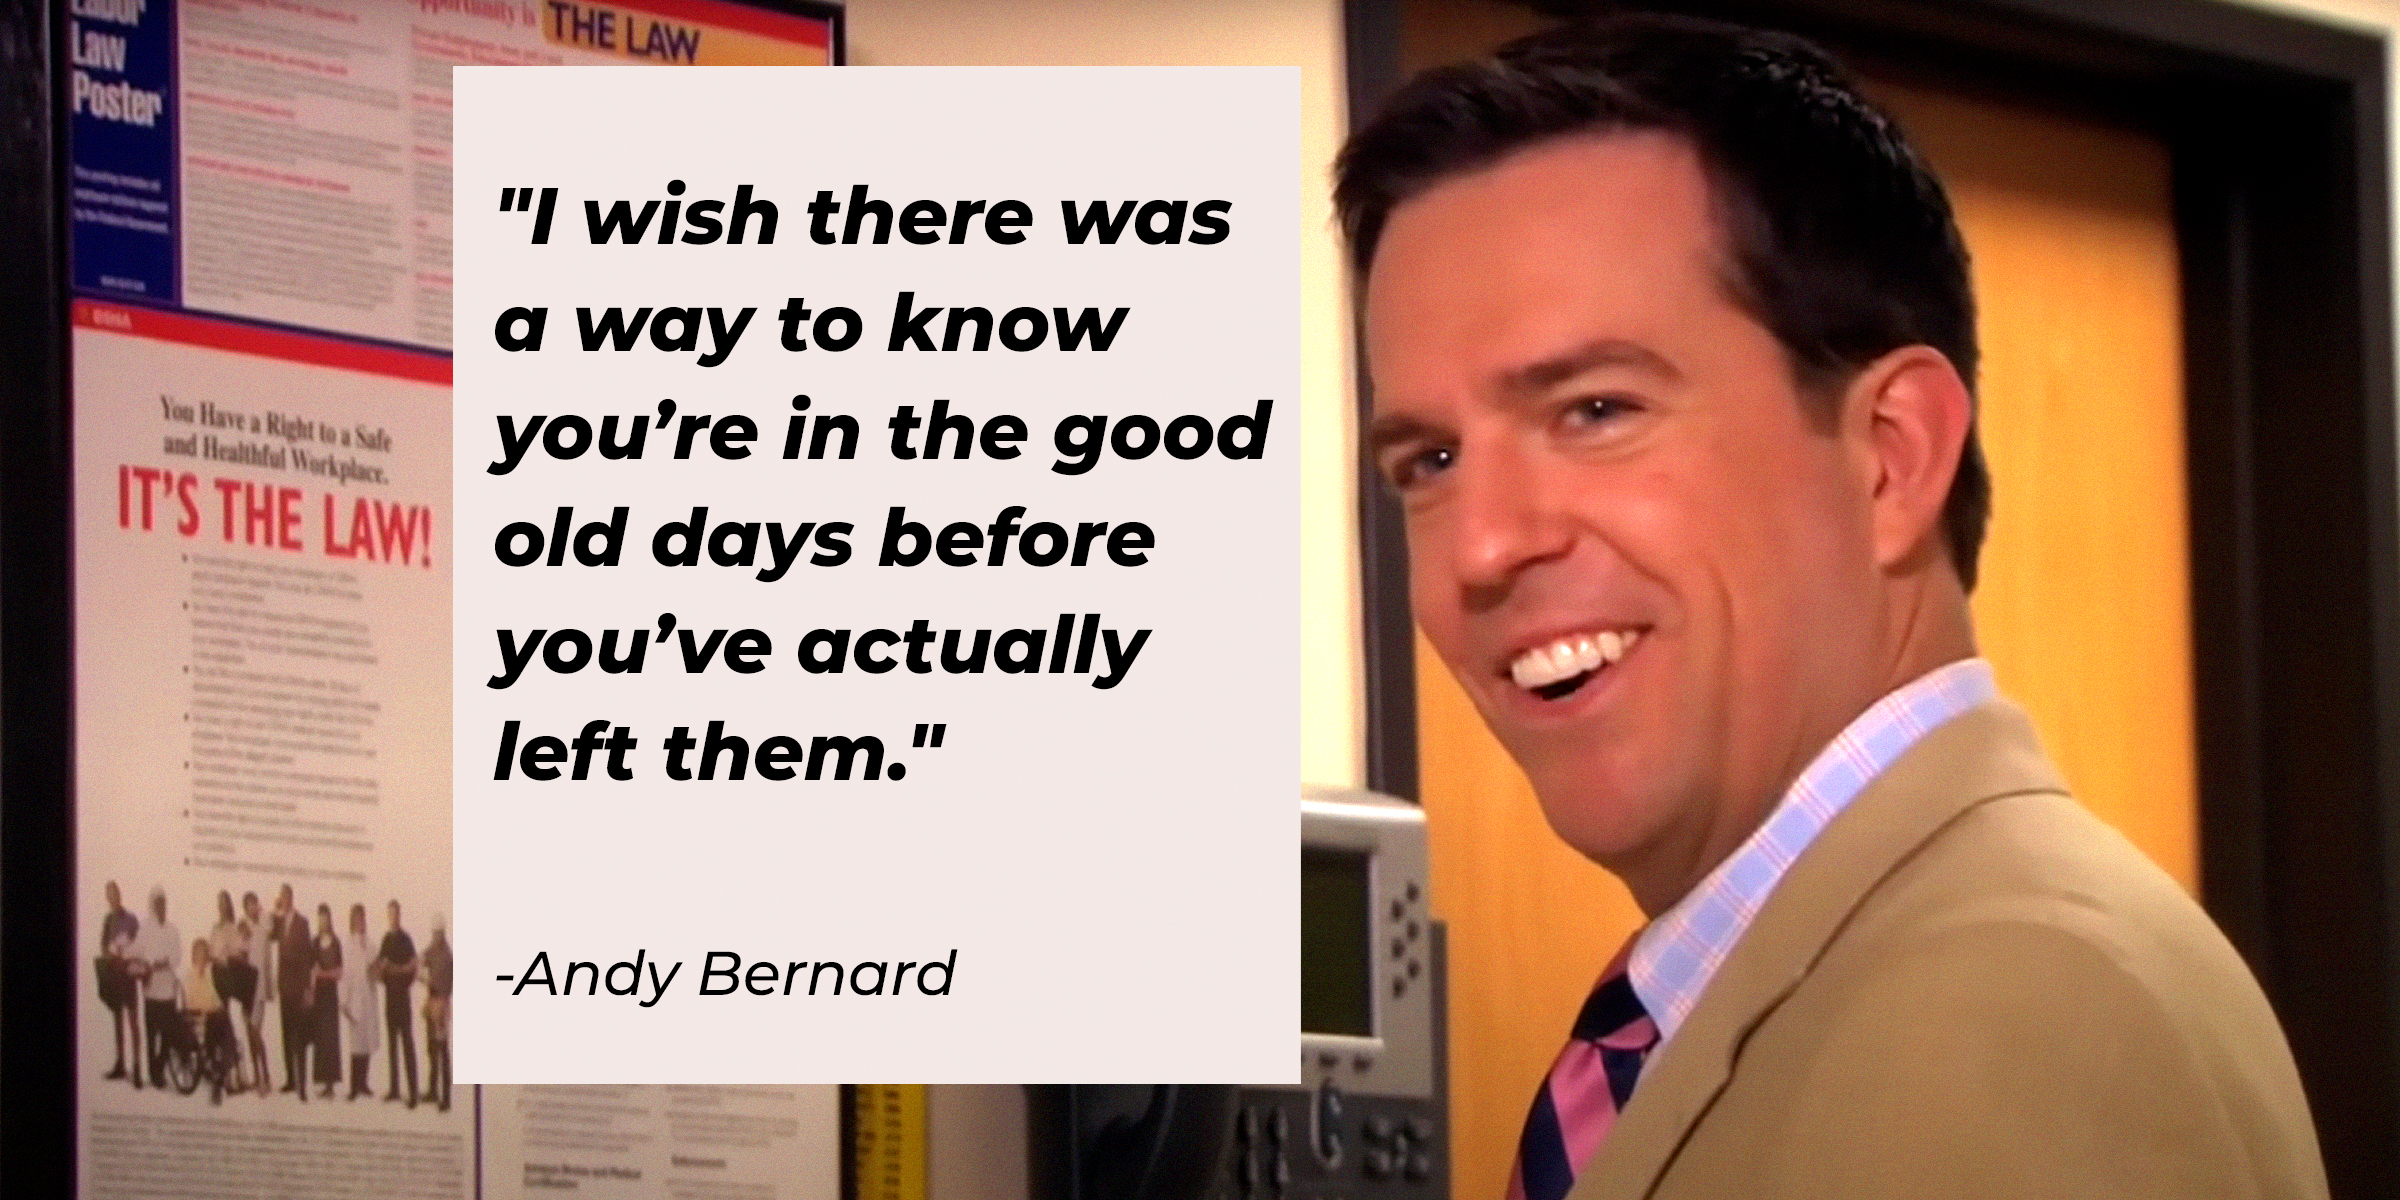 Andy Bernard, with his quote: “I wish there was a way to know you’re in the good old days before you’ve actually left them.” │Source: youtube.com/TheOffice